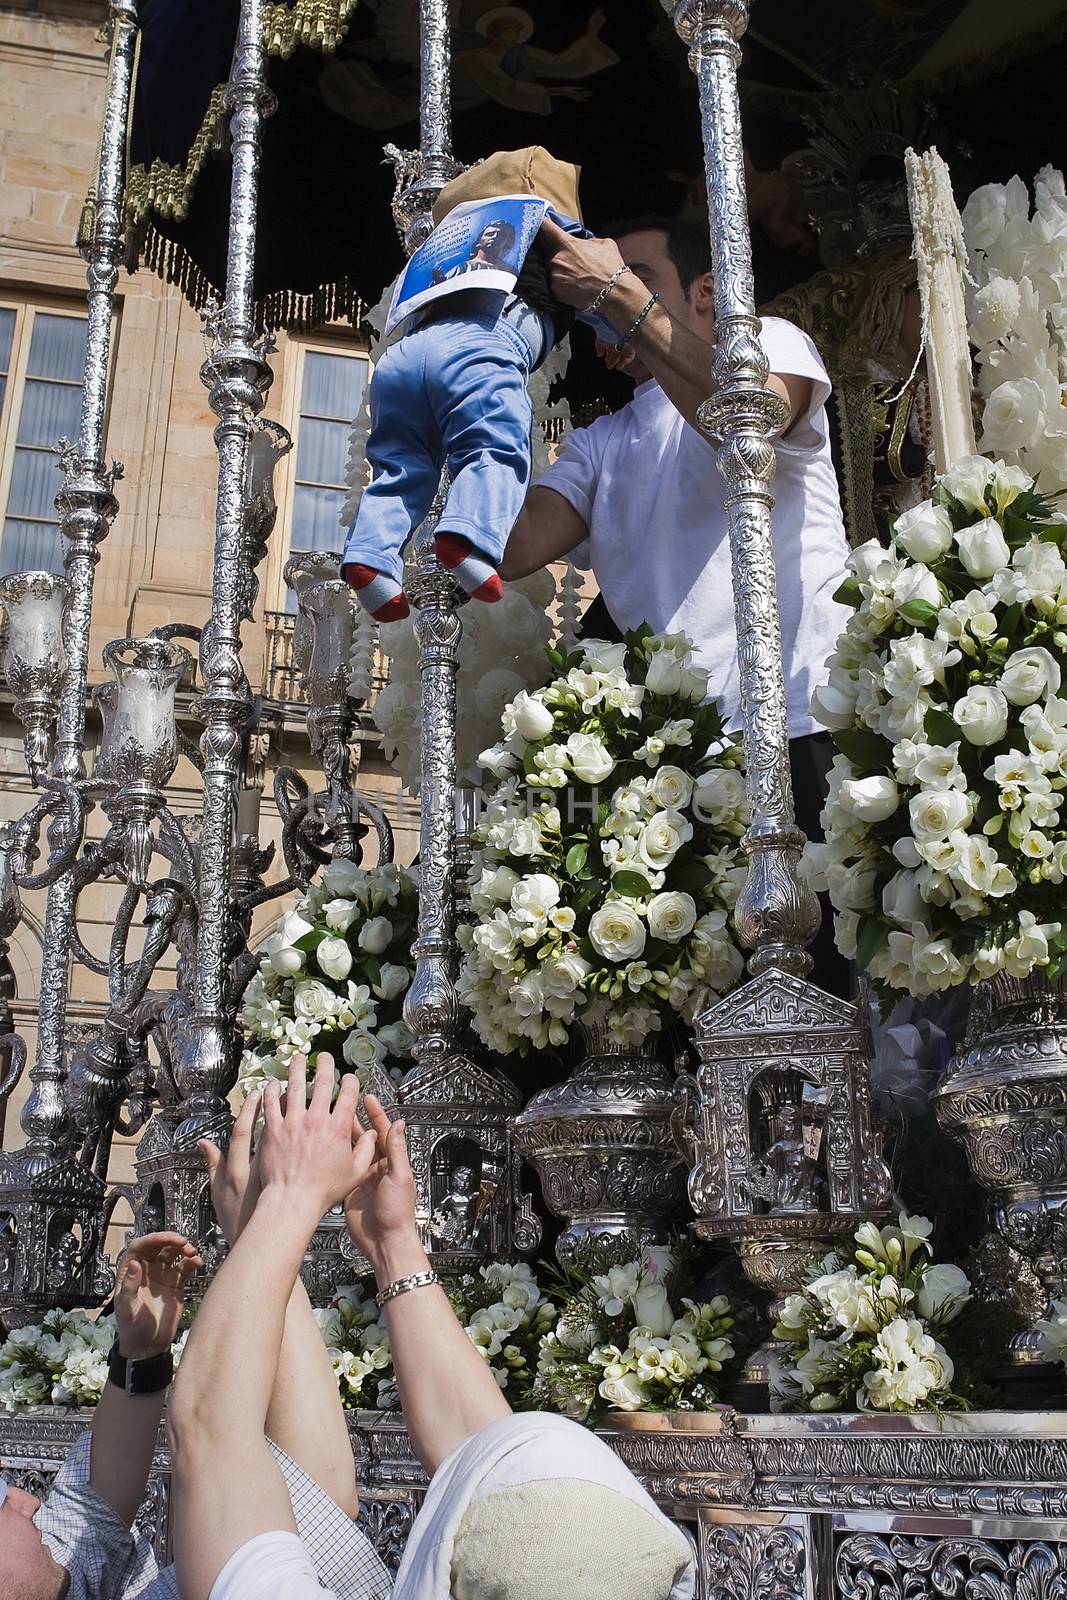 Popular Custom to bless a baby before the Virgin in a throne during Holy Week, Andalucia, Spain